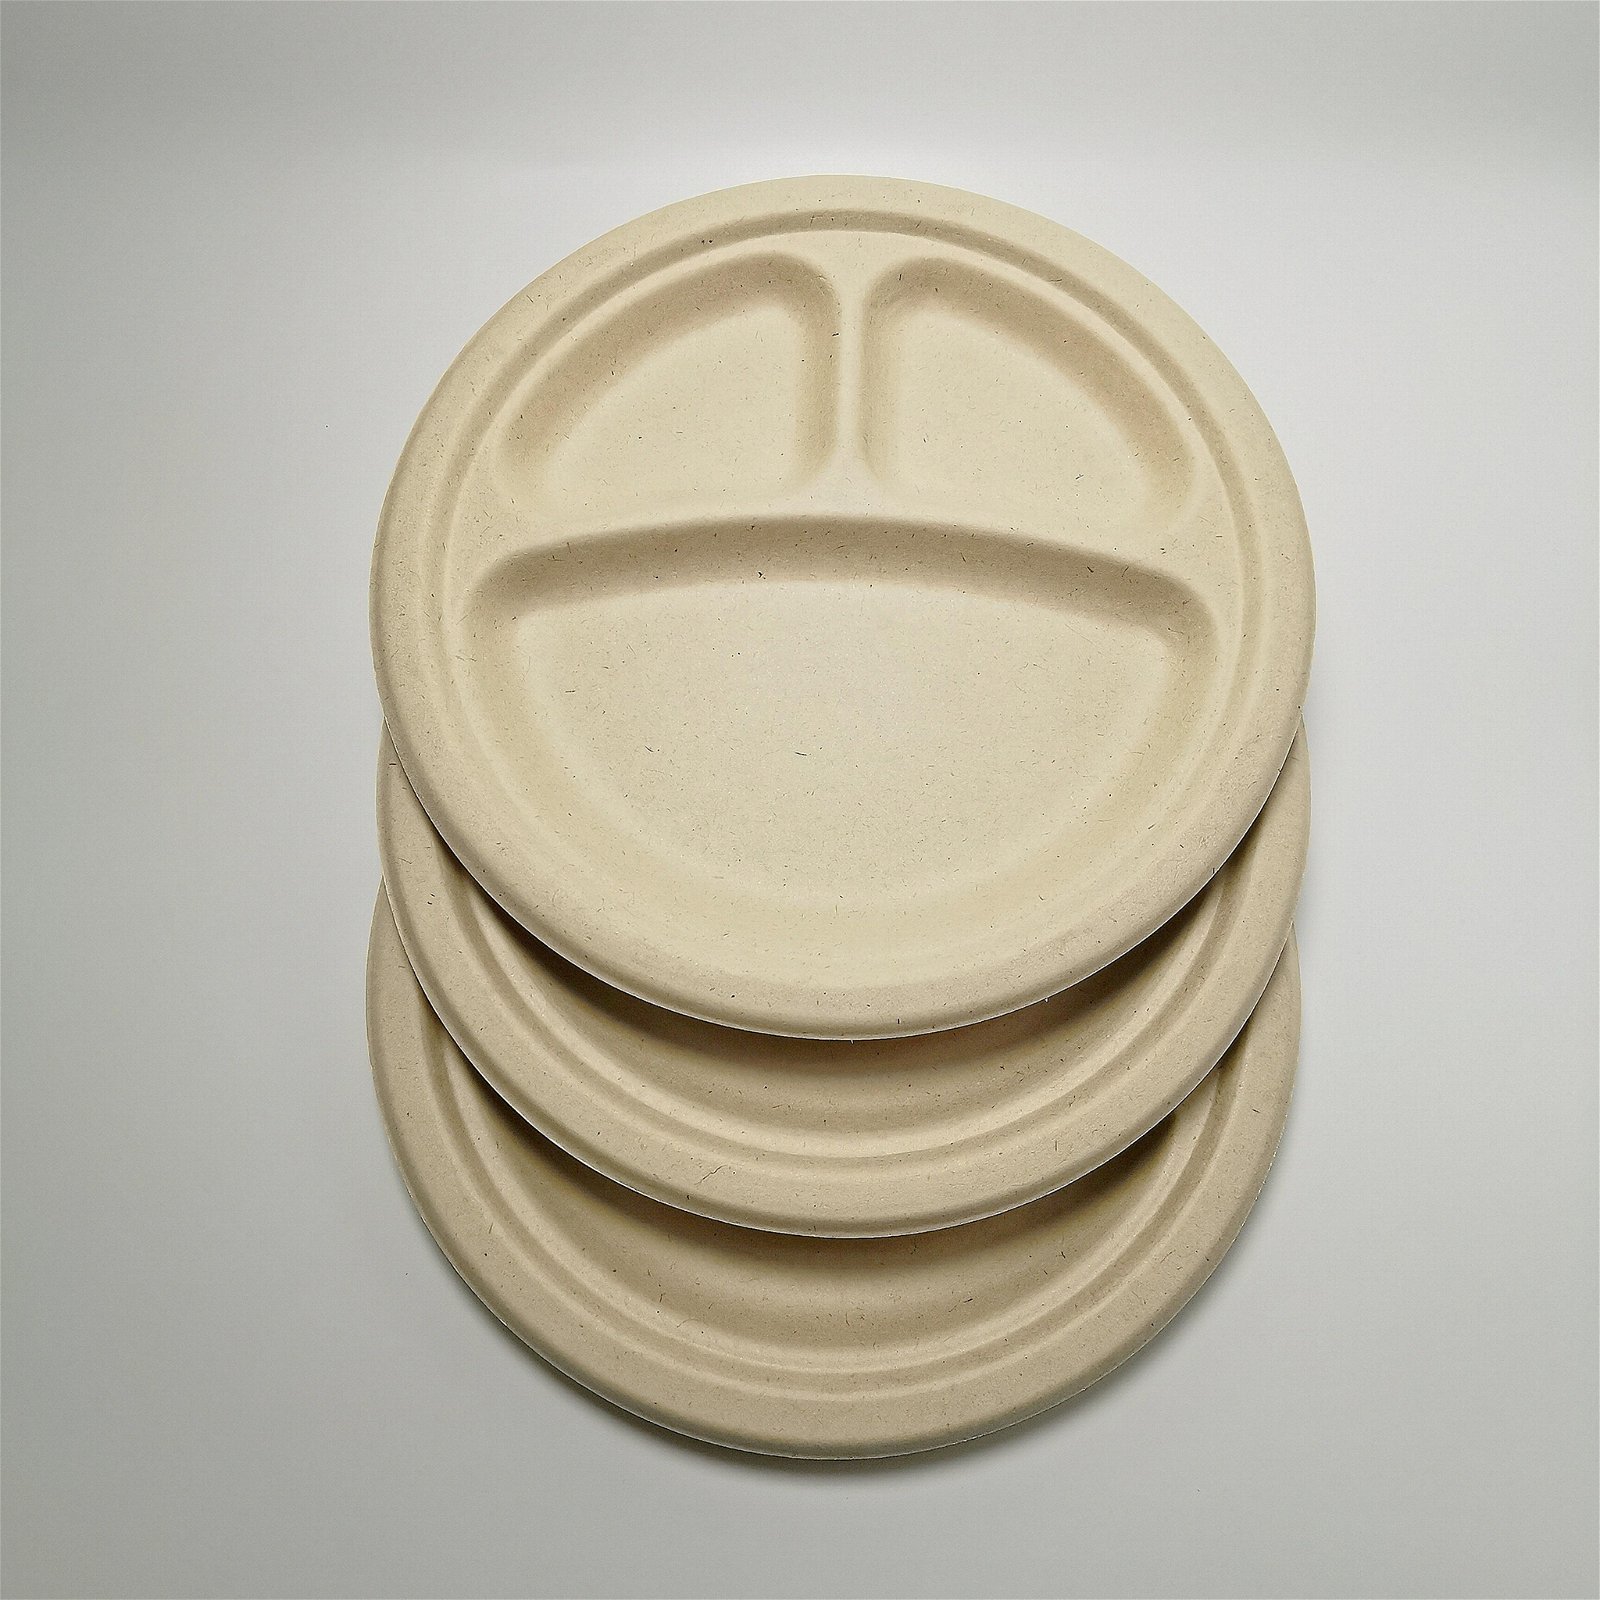 9 inch 3 compartment round Wheat straw Plate 100% biodegradable Plates 4